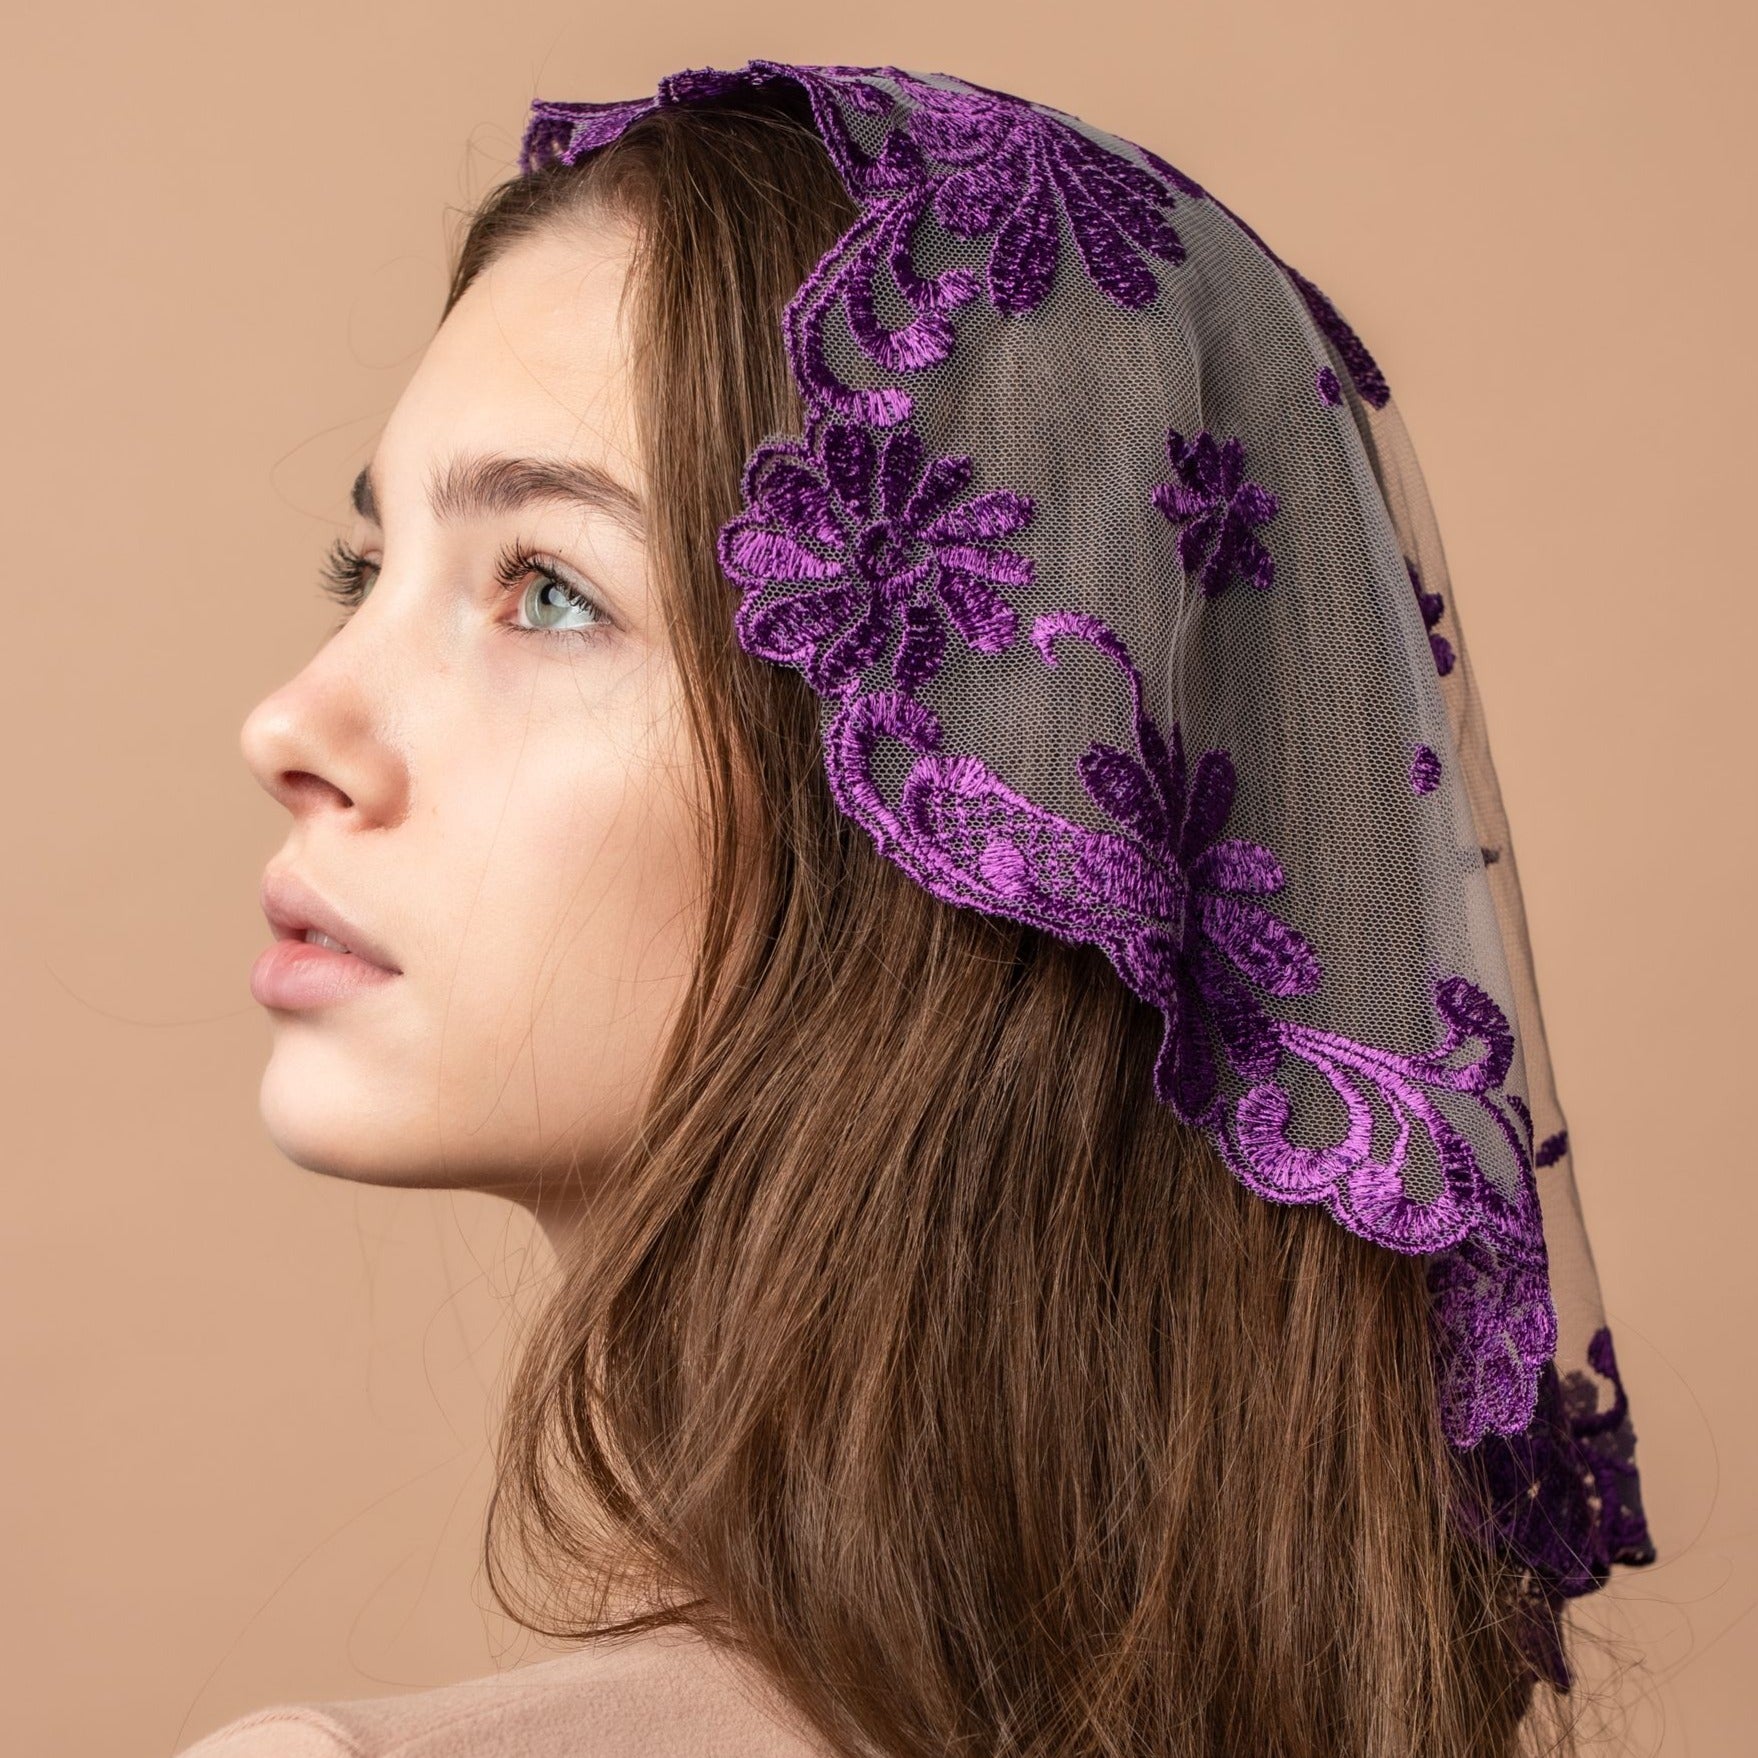 Copy of NEW!! Bestseller veil in new purple color - MariaVeils